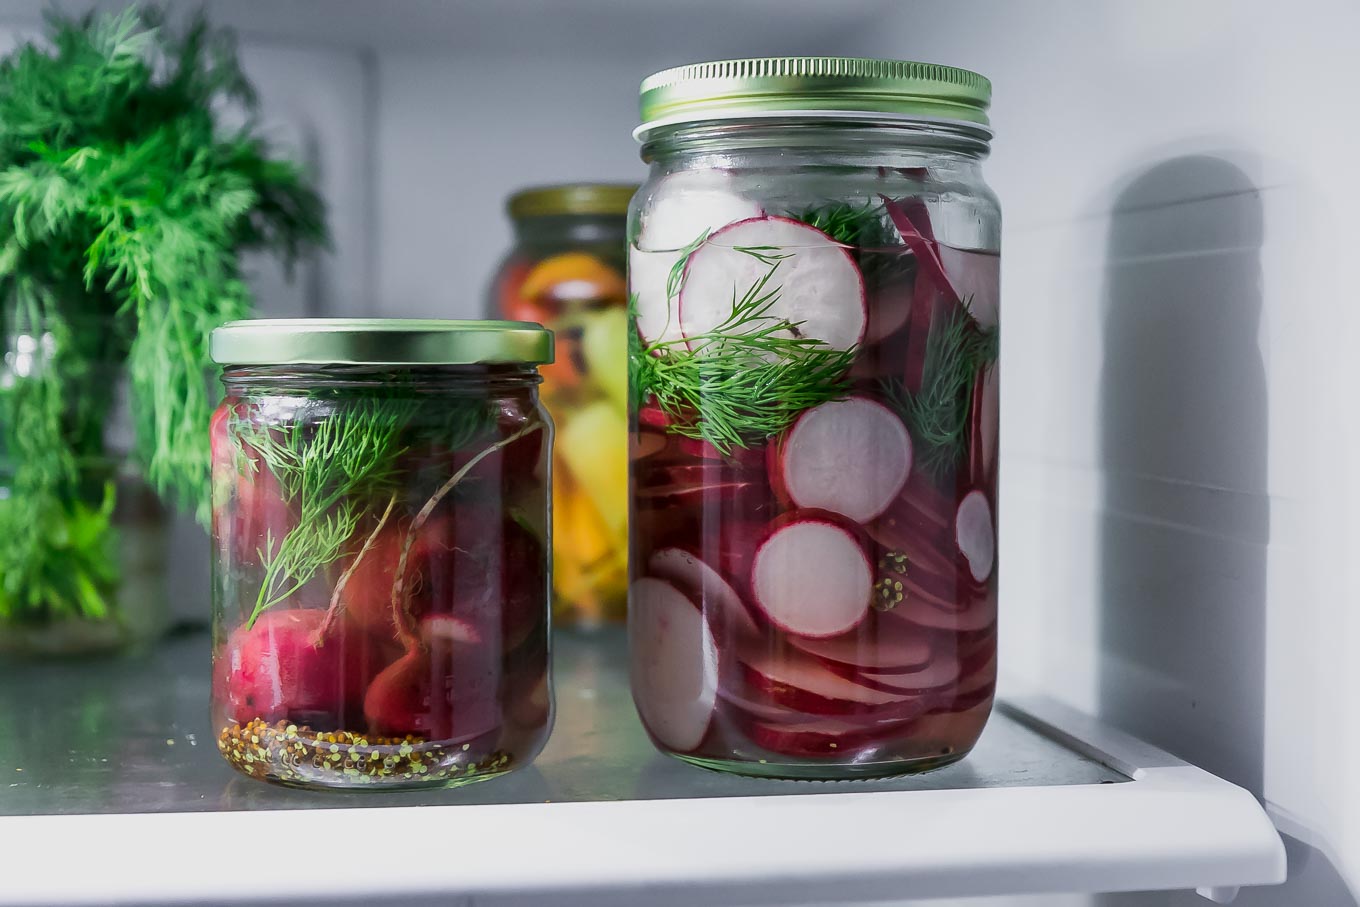 two jars of whole and sliced pickled radishes in a the refrigerator